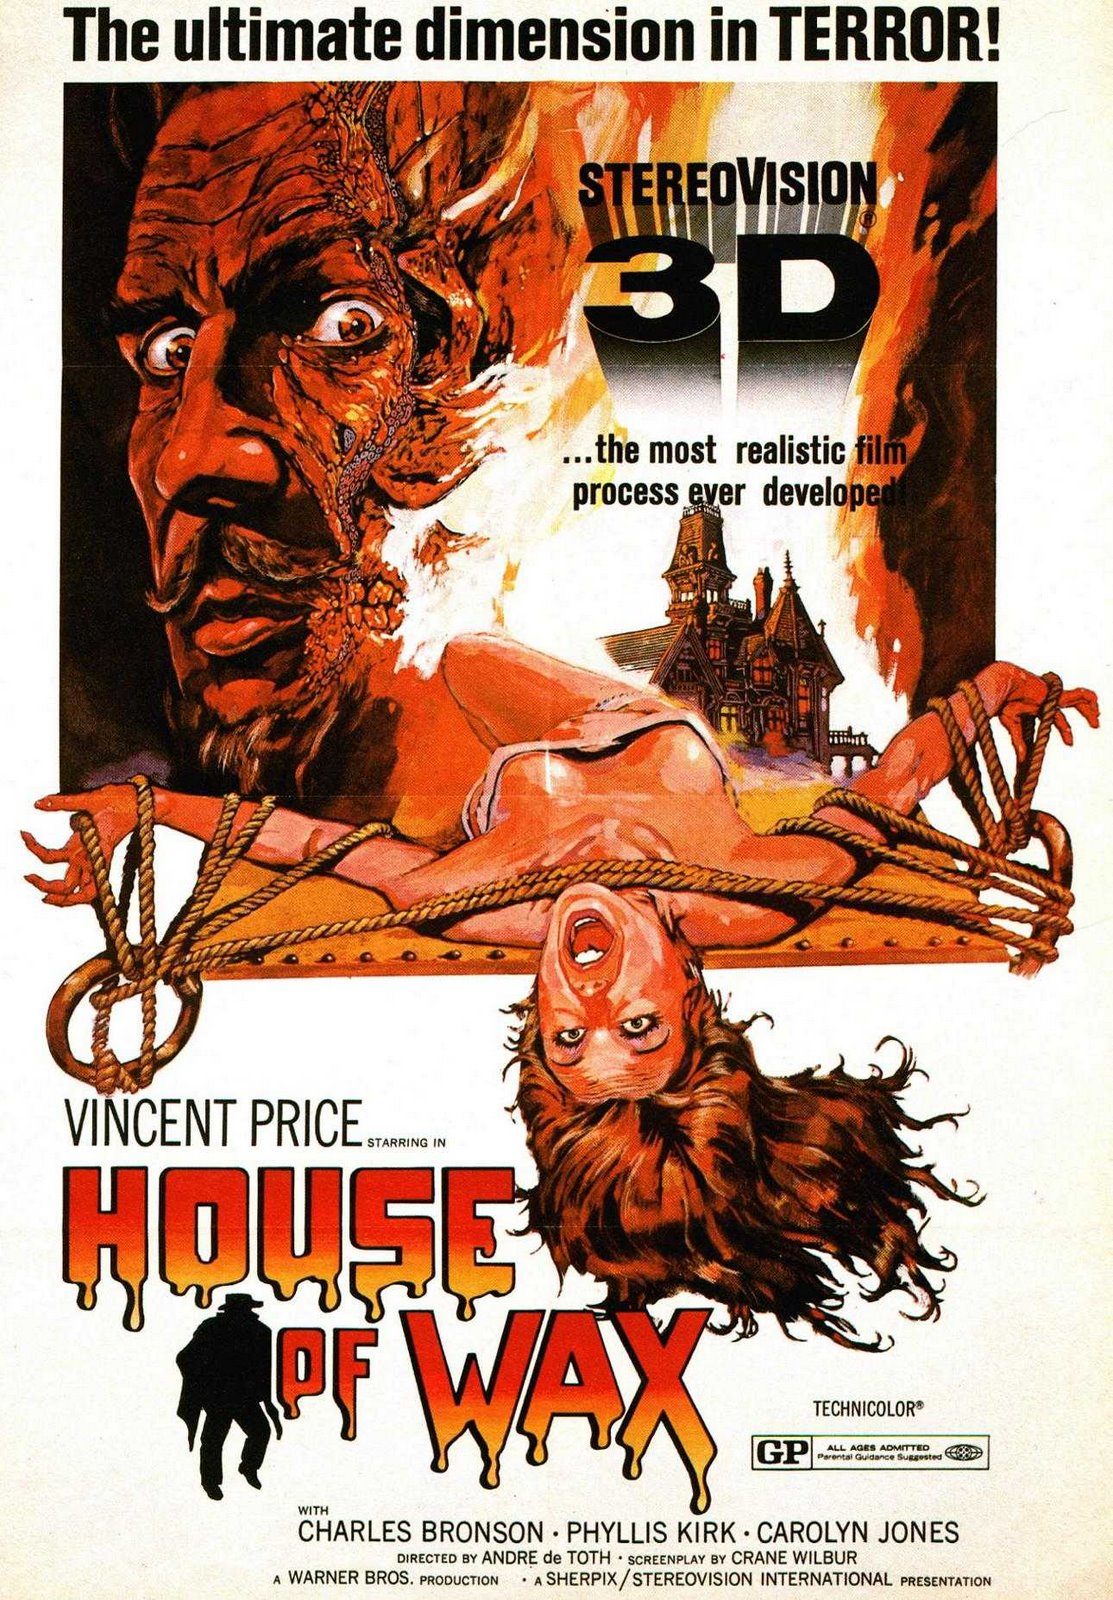 [1953+-+House+Of+Wax+(Poster).jpg]